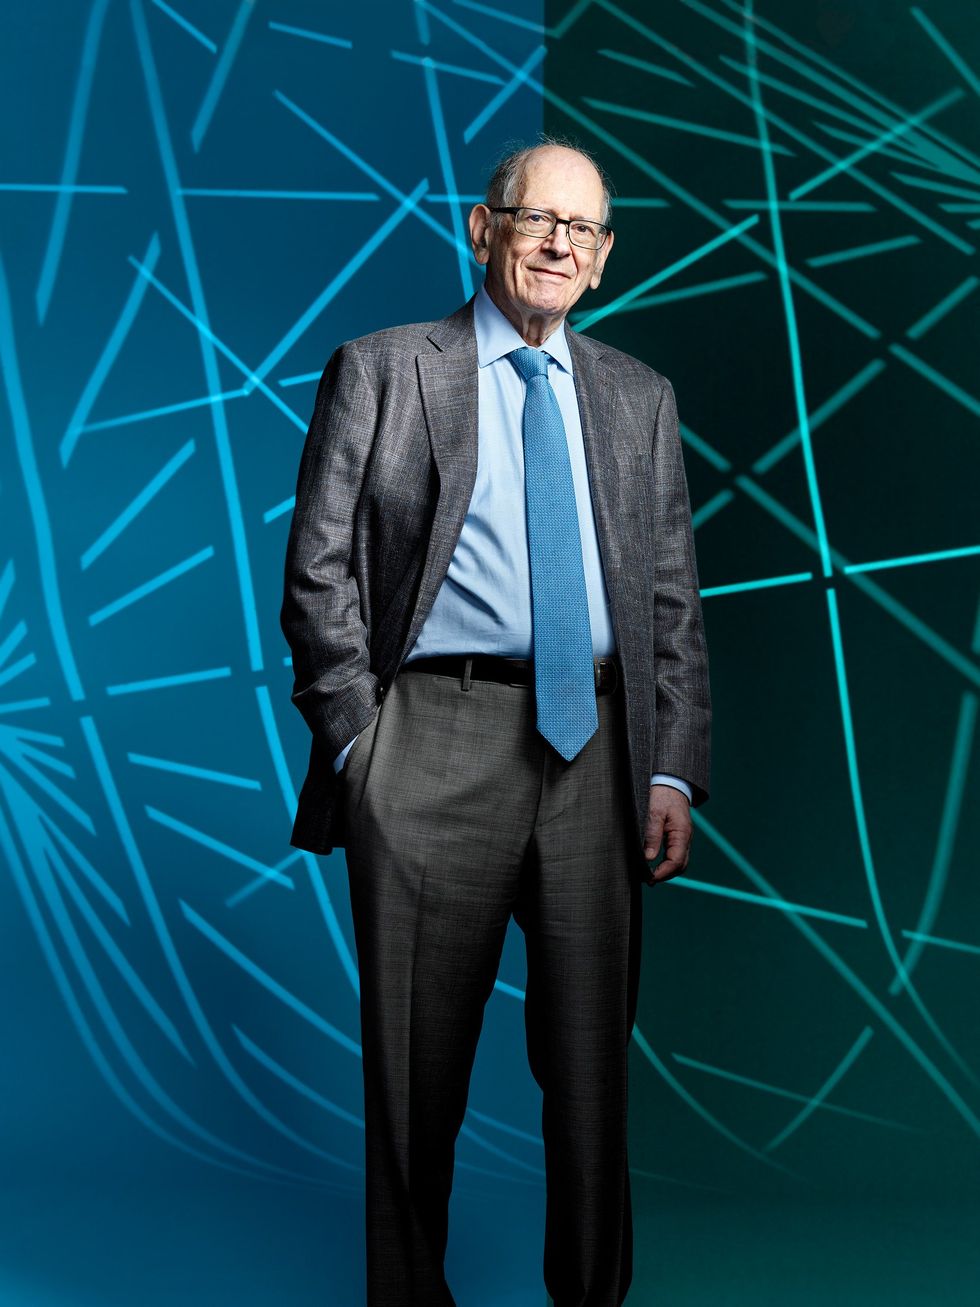 Photo of an older man in a dark suit in front of a blue and green lined background